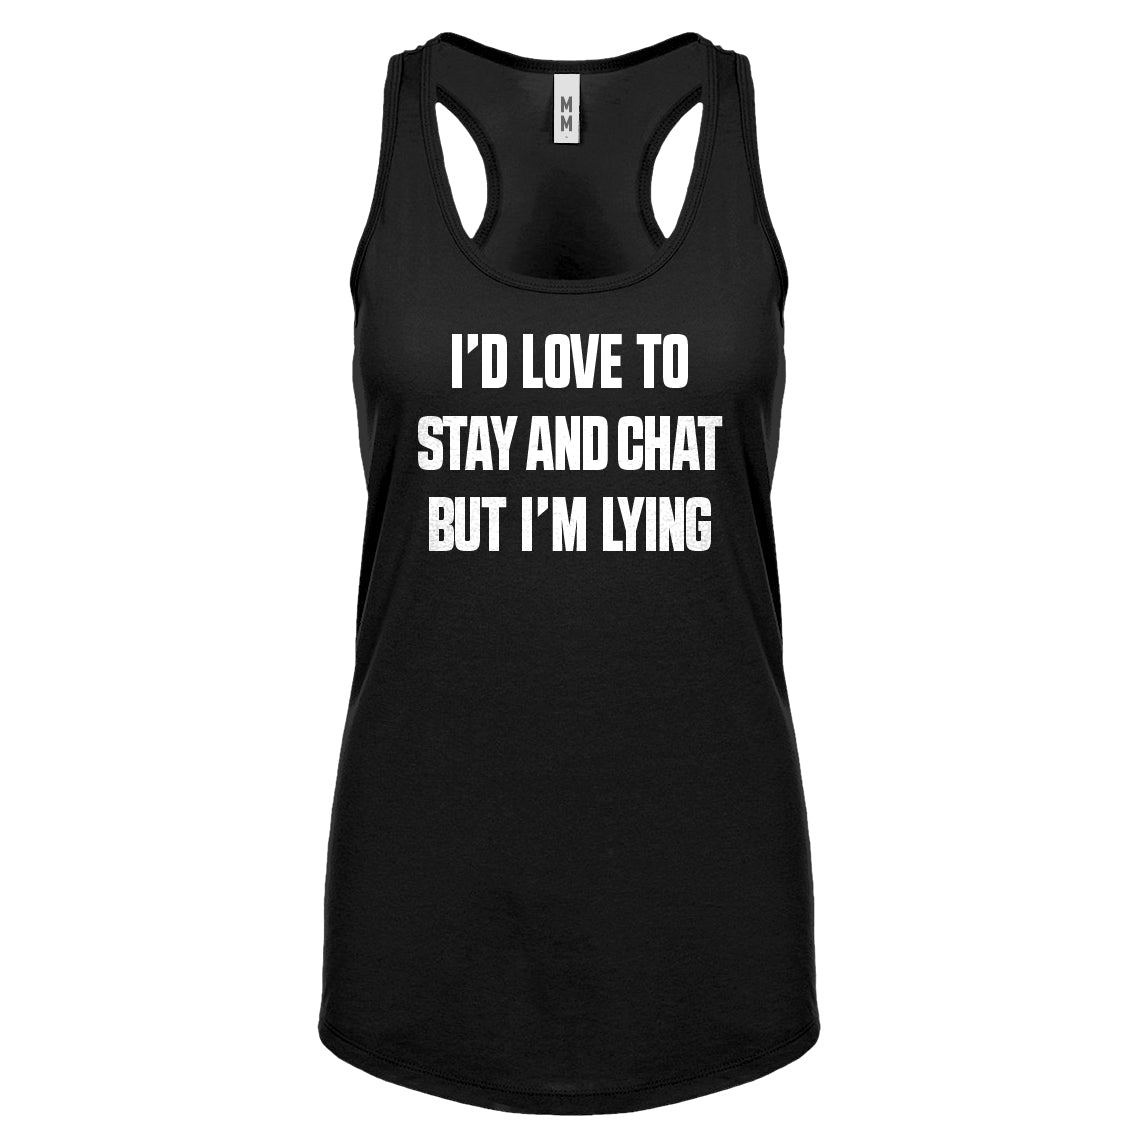 Racerback Id Love to Stay and Chat but Im Lying Womens Tank Top